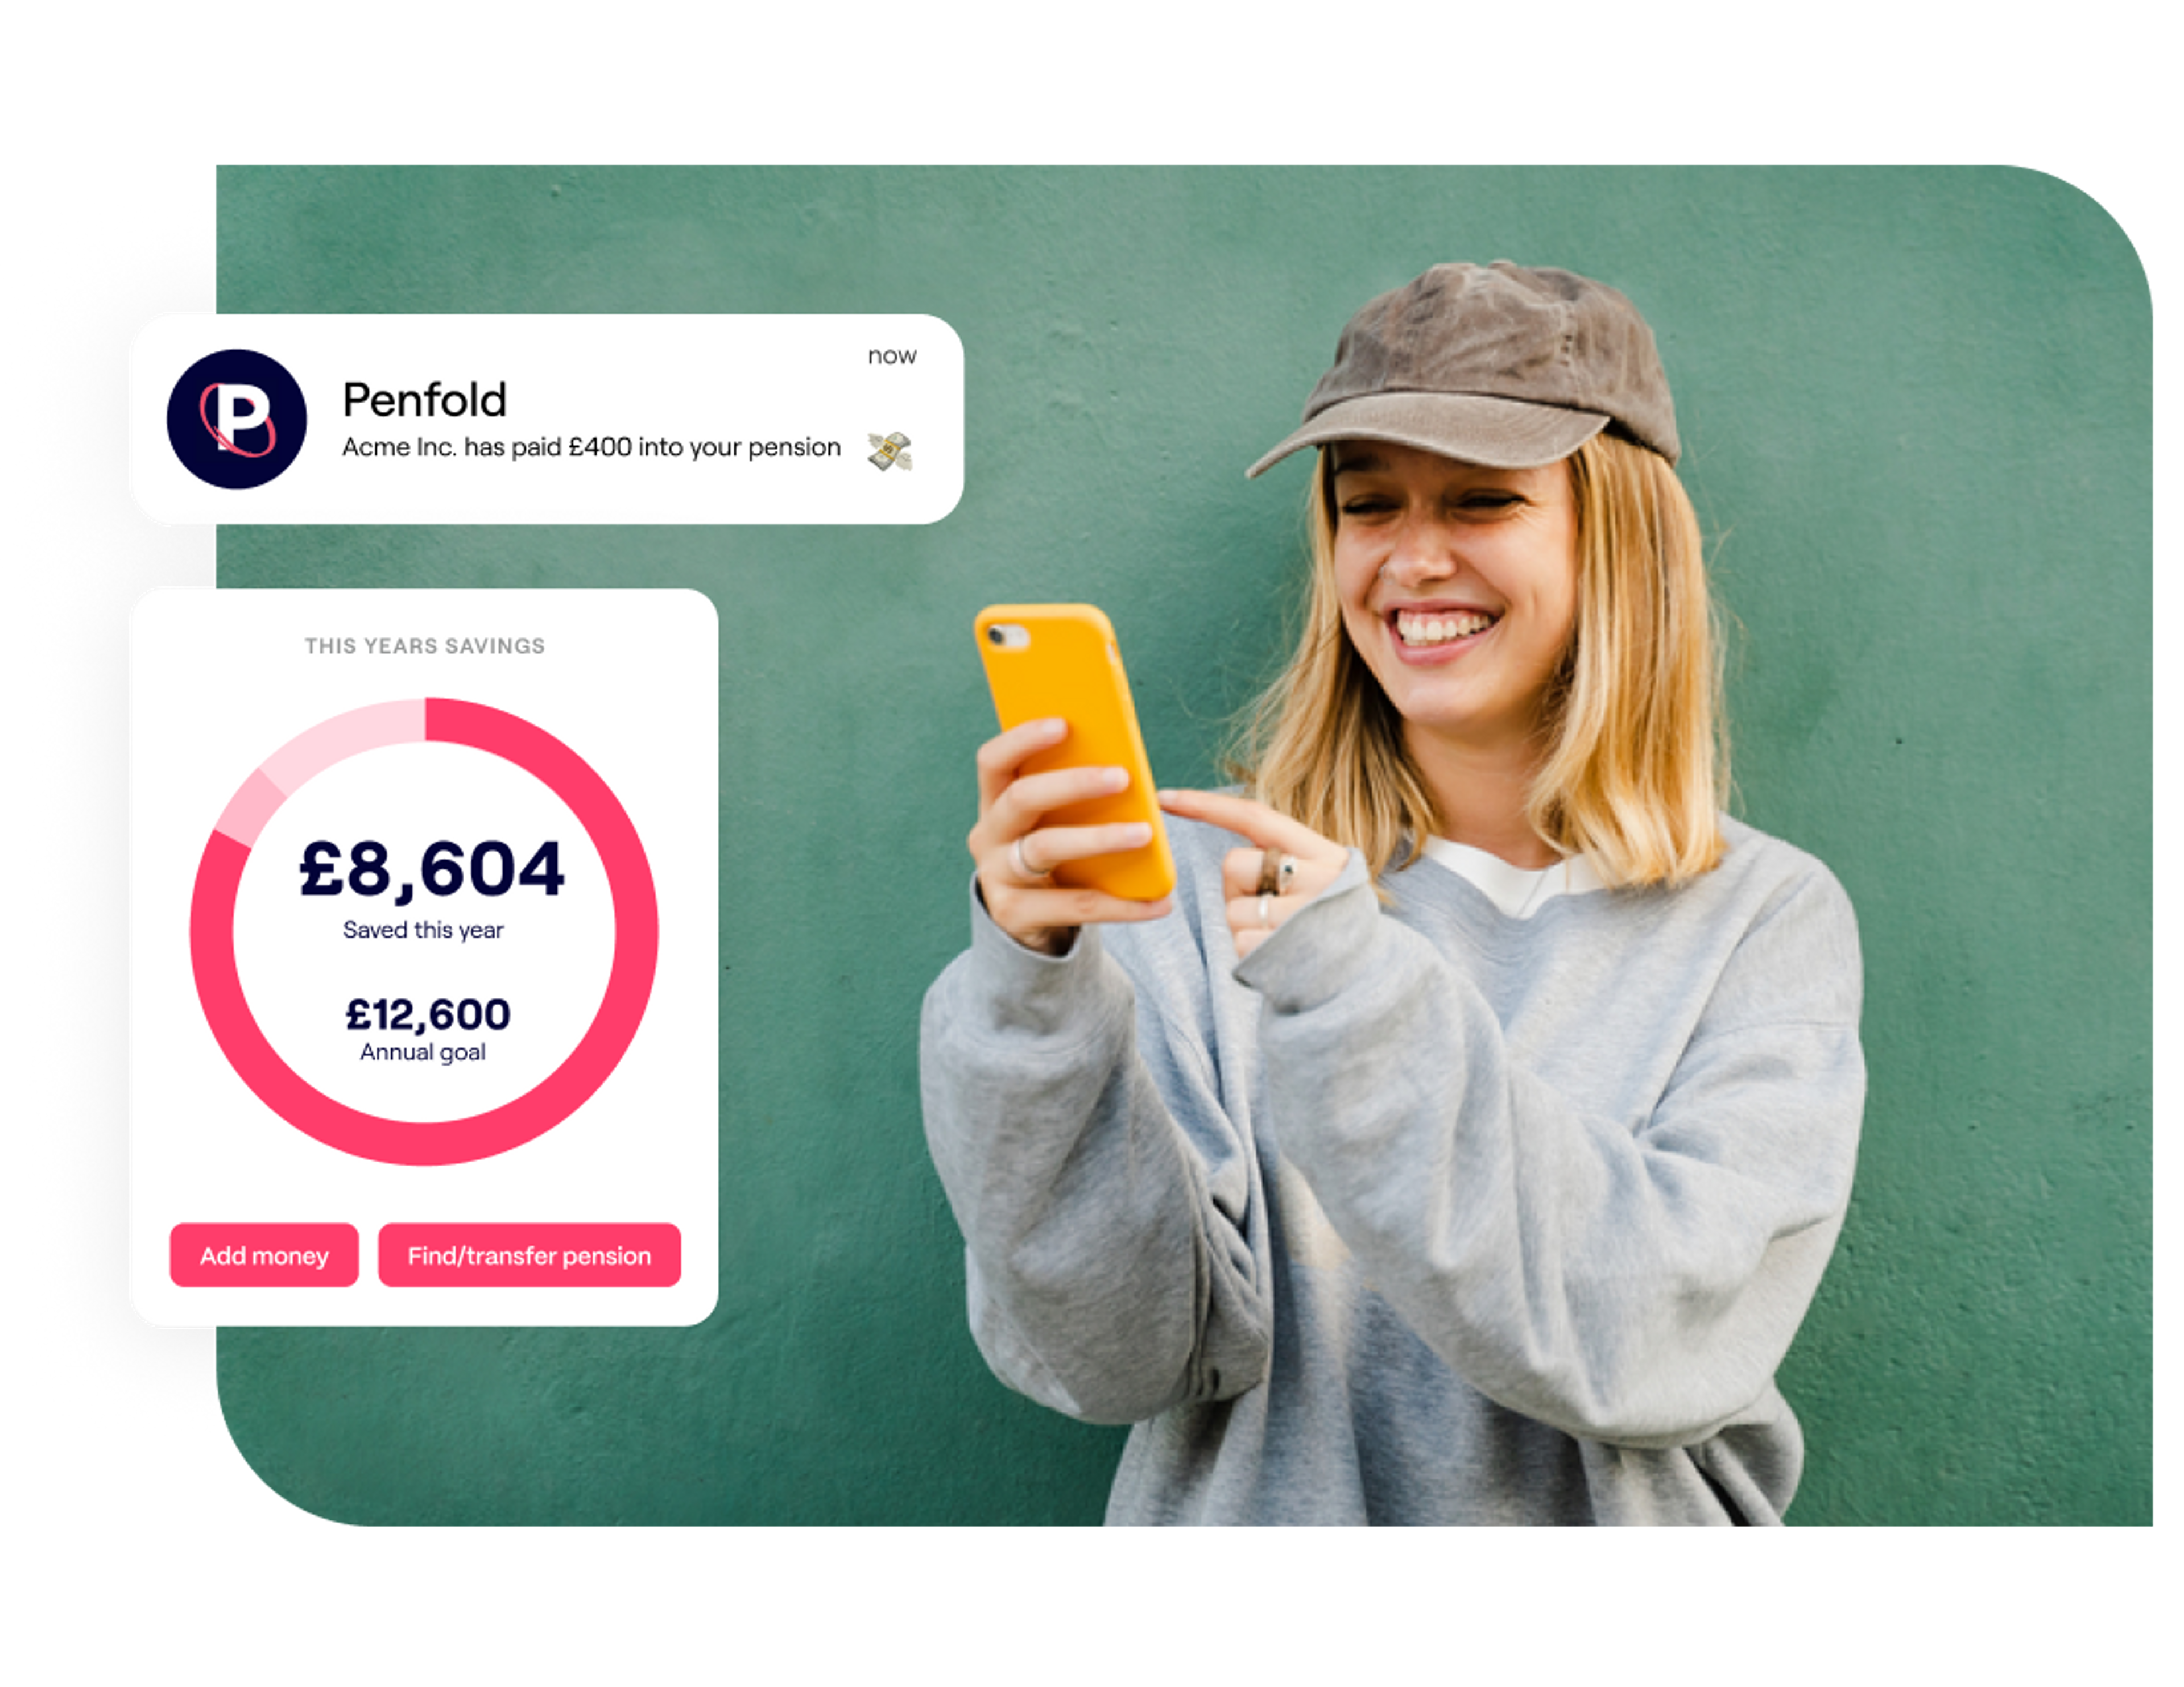 A photo of a woman looking down at a phone in her hands with an overlay excerpt of the Penfold app showing this year's pension savings